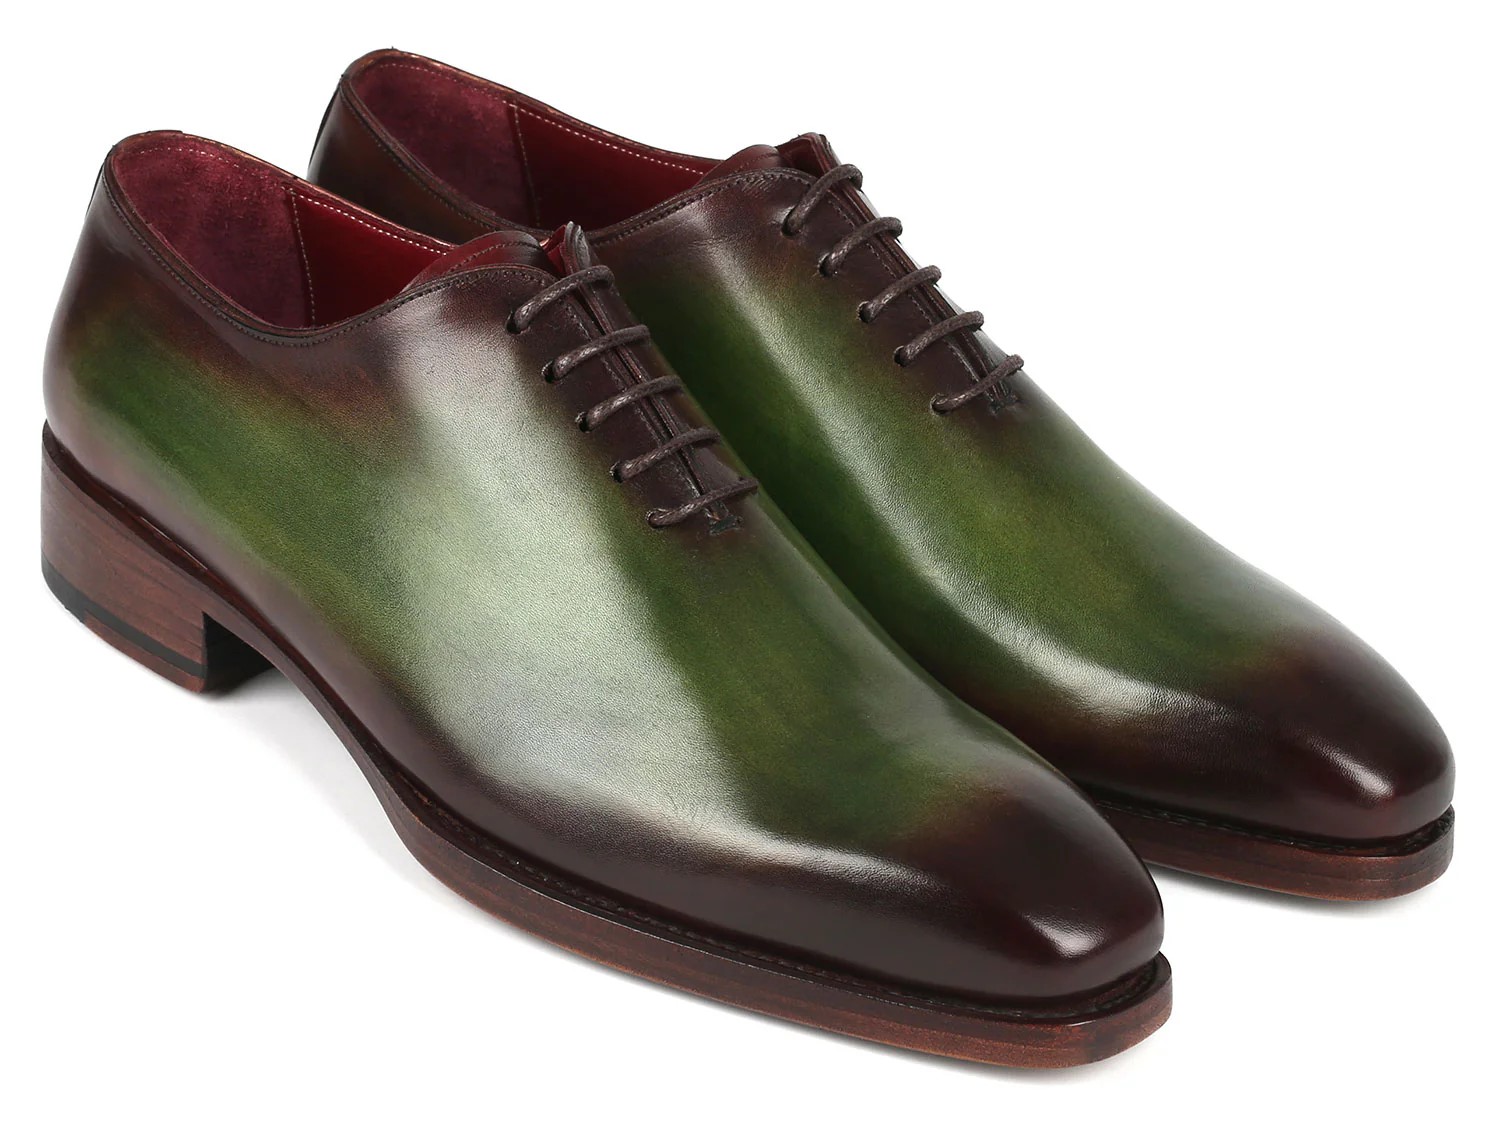 Paul Parkman Oxfords Green / Bordeaux Genuine Leather Goodyear Welted Wholecut Oxford Dress Shoes 044GBD